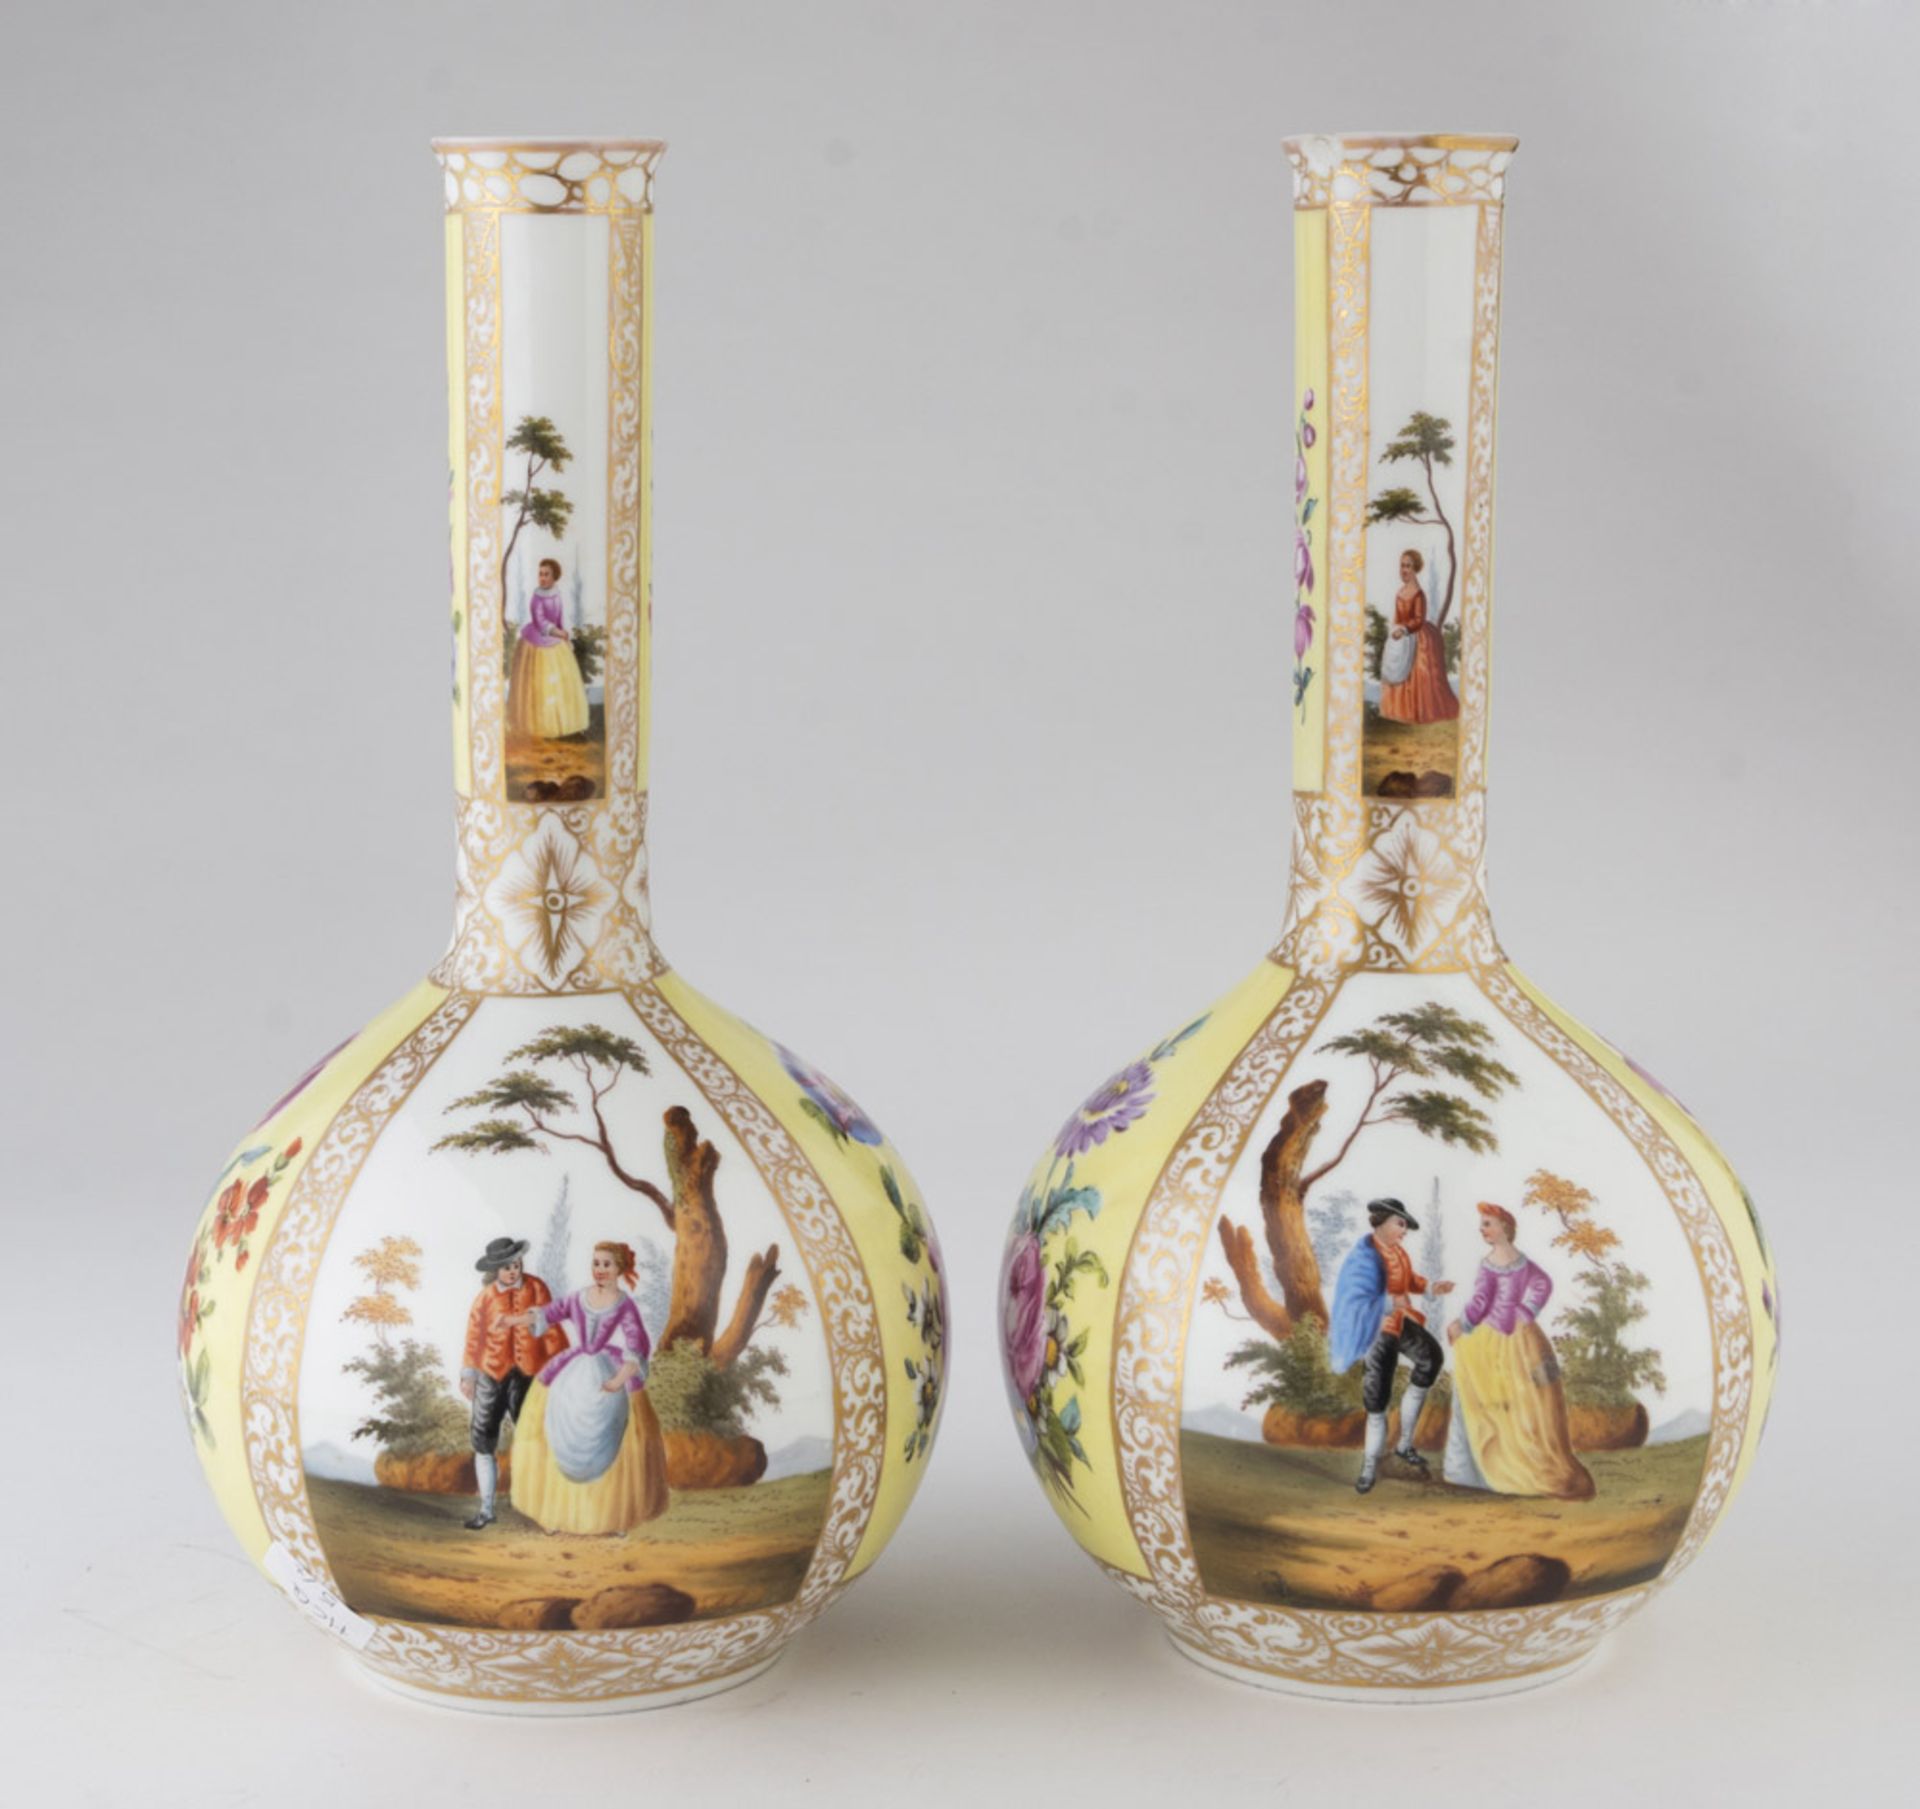 A PAIR OF PORCELAIN VASES – MEISSEN LATE 19TH CENTURY